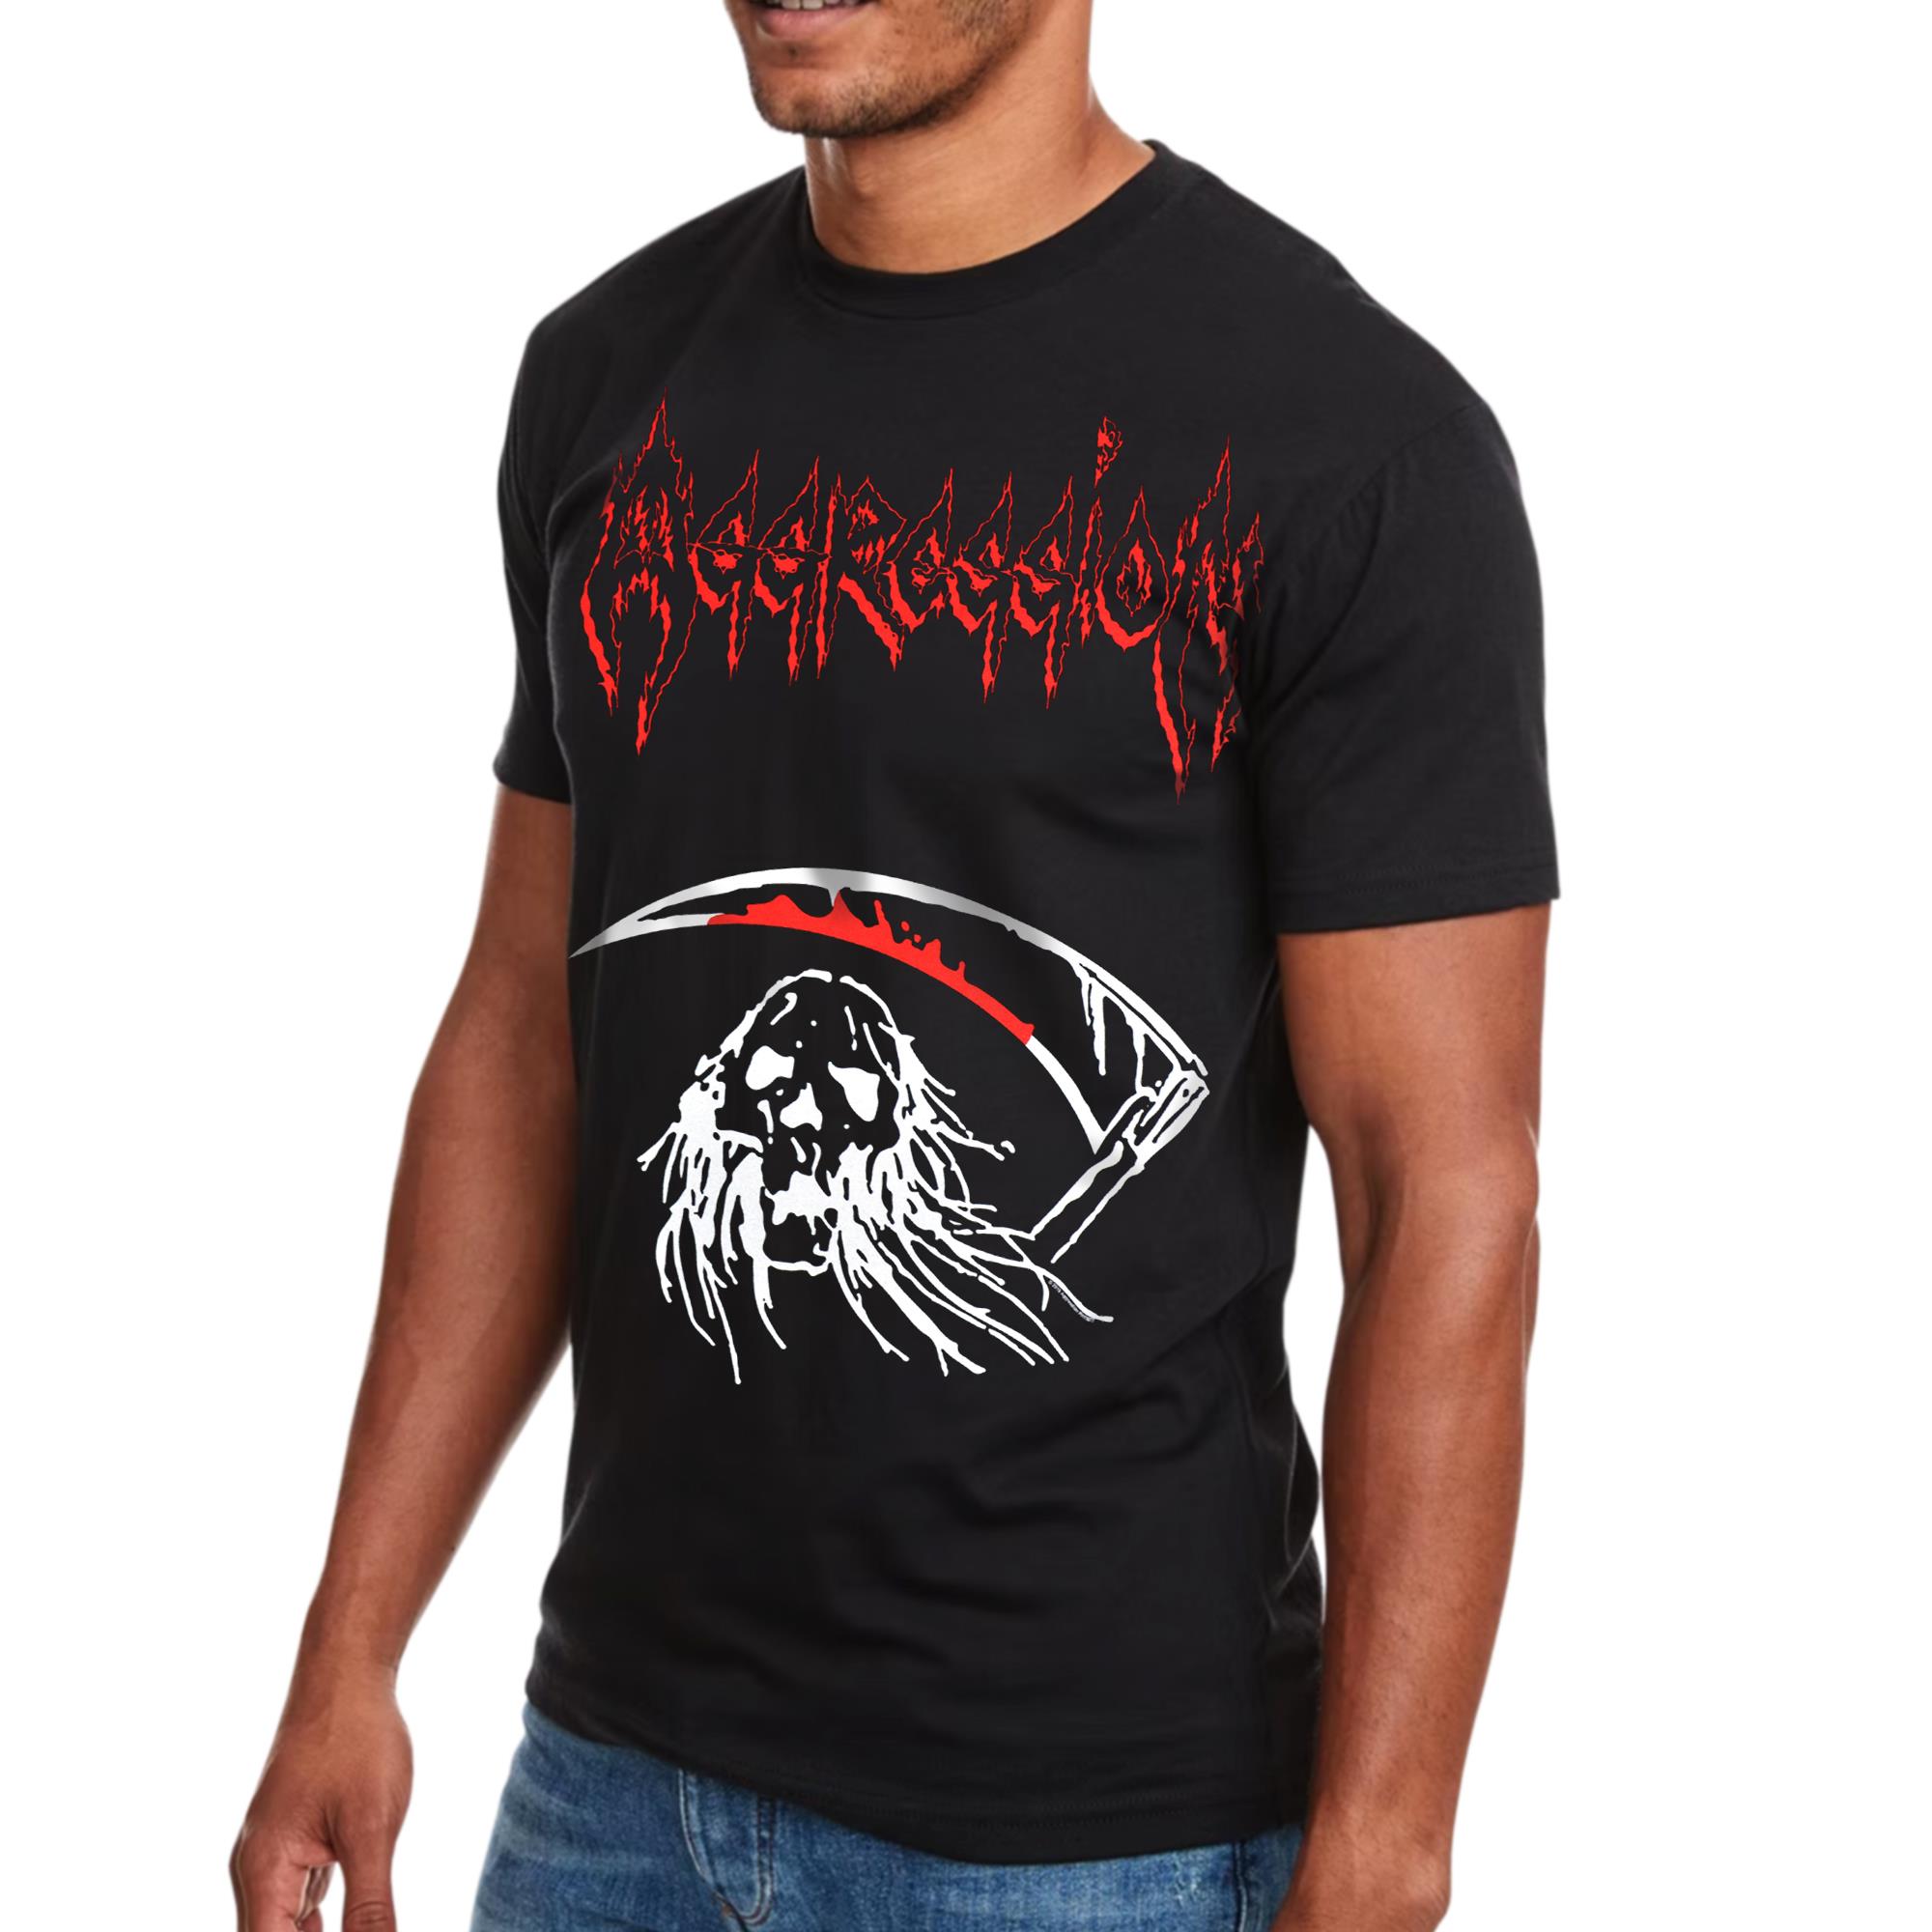 By The Reaping Hook T-Shirt